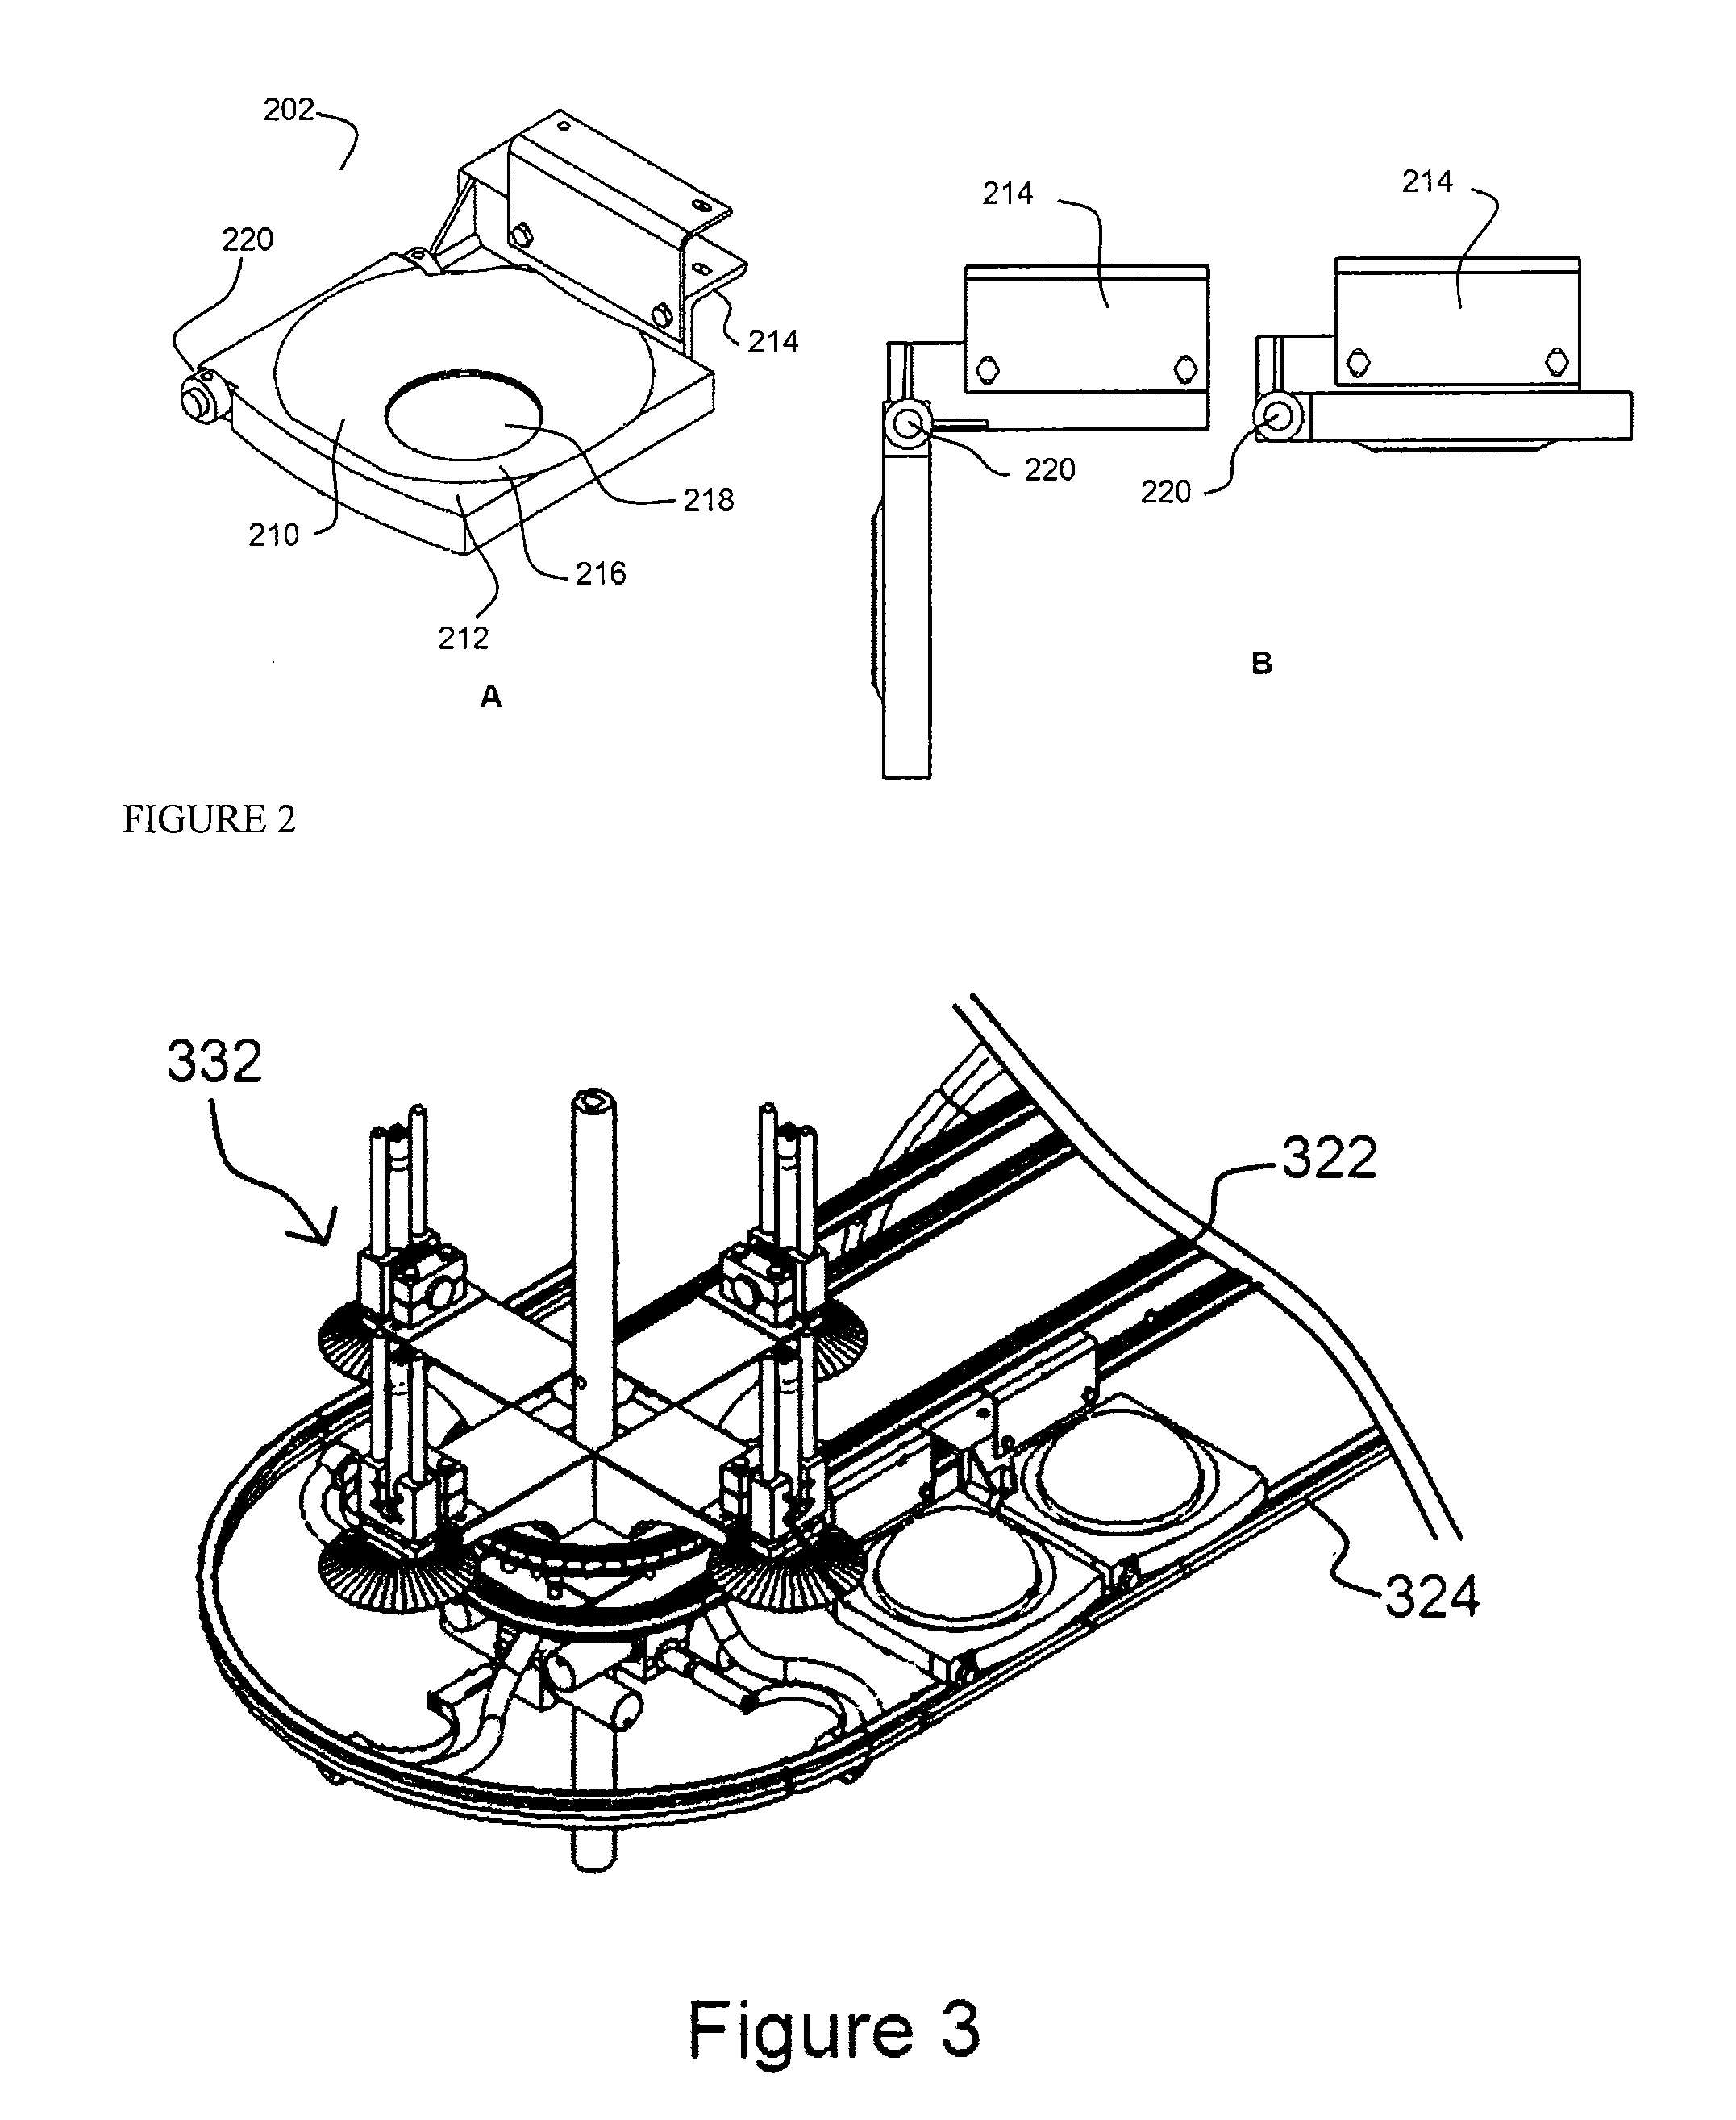 Broccoli floreting systems and methods